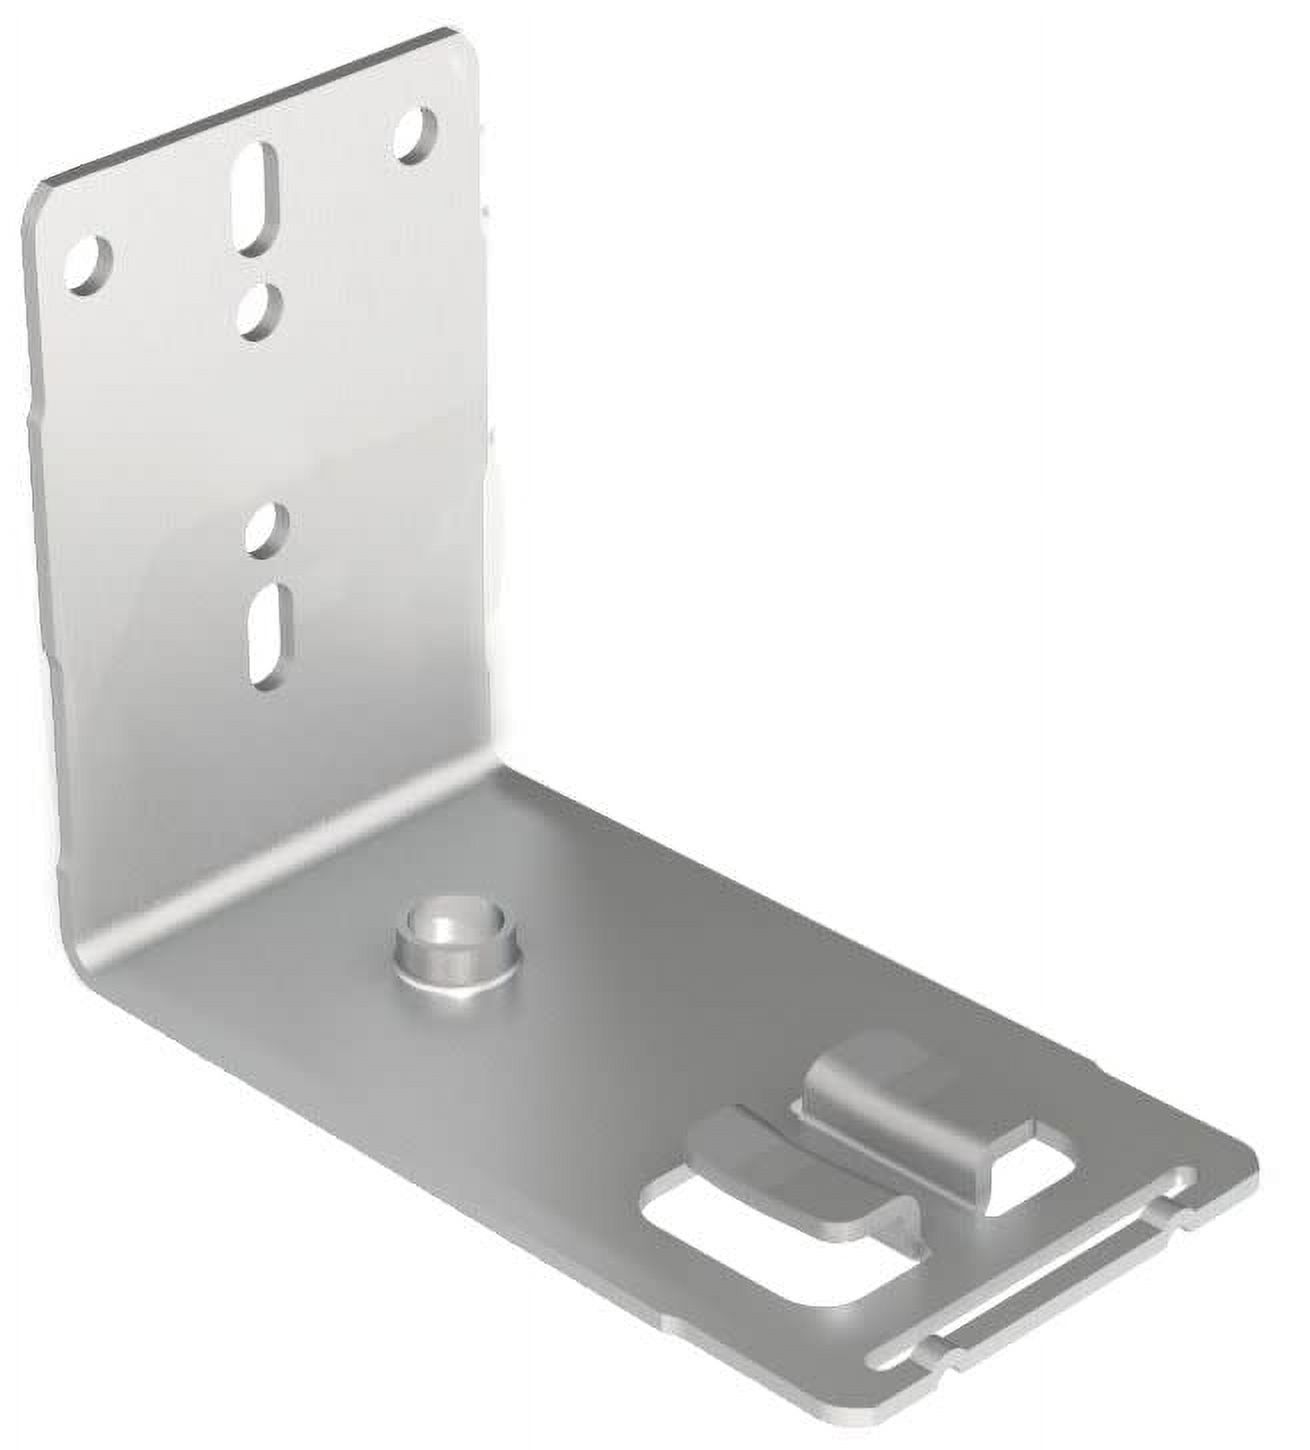 Blum 295.3550.01 Tandem Series Rear Narrow Mounting Bracket For Face Frame Cabinets - Zinc - image 1 of 1